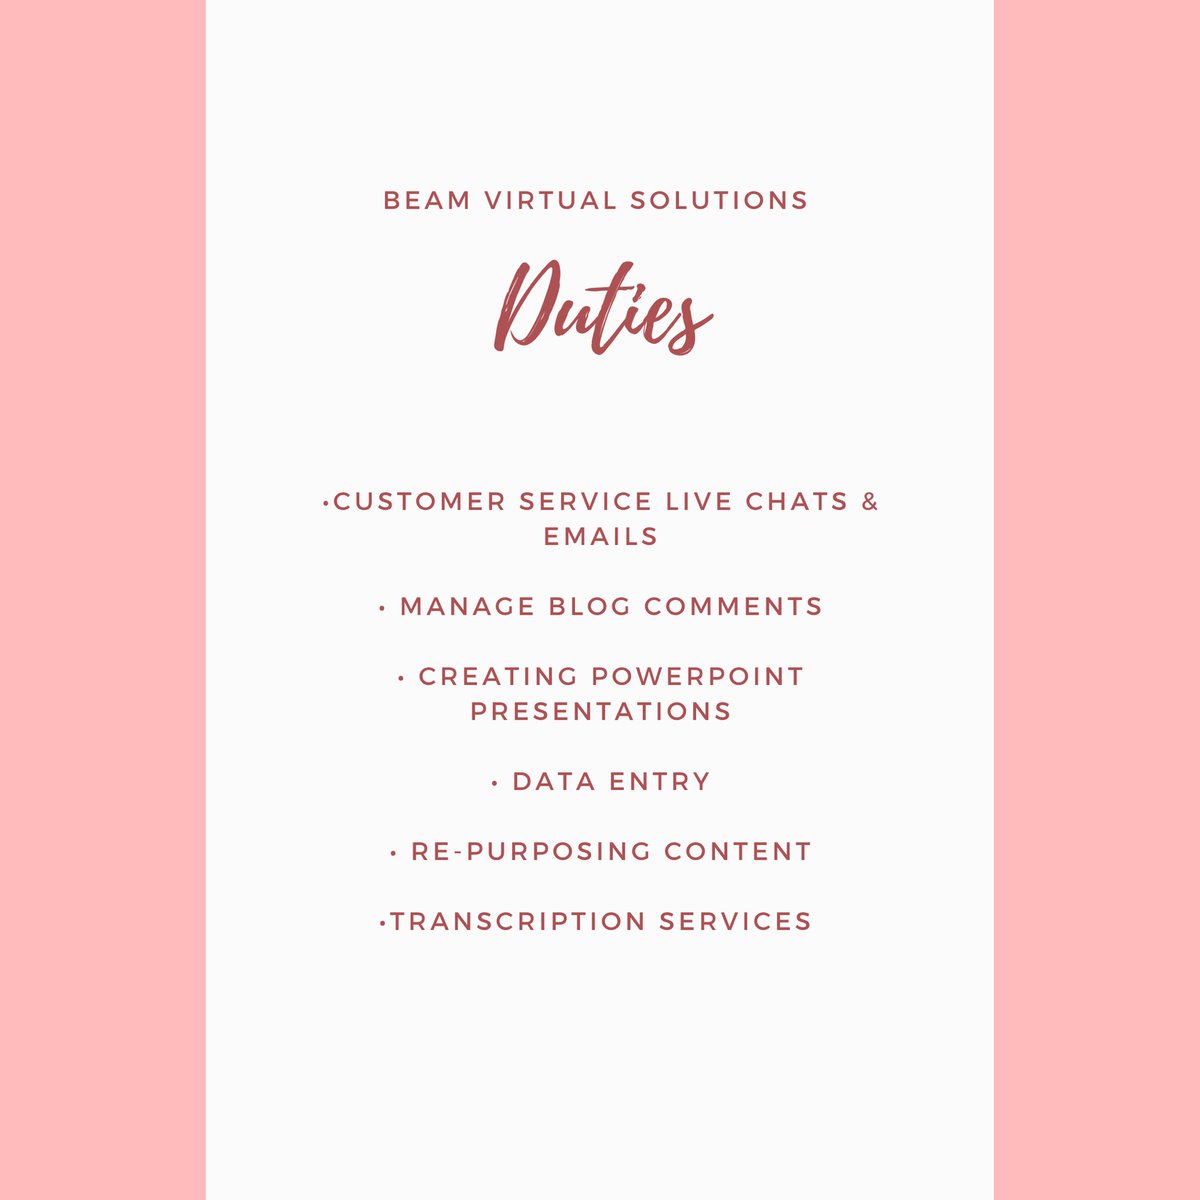 Need help with admin duties? 

Enquire now! 
beamvirtualsolutions.com

#virtualassistant #admin #administrativeduties